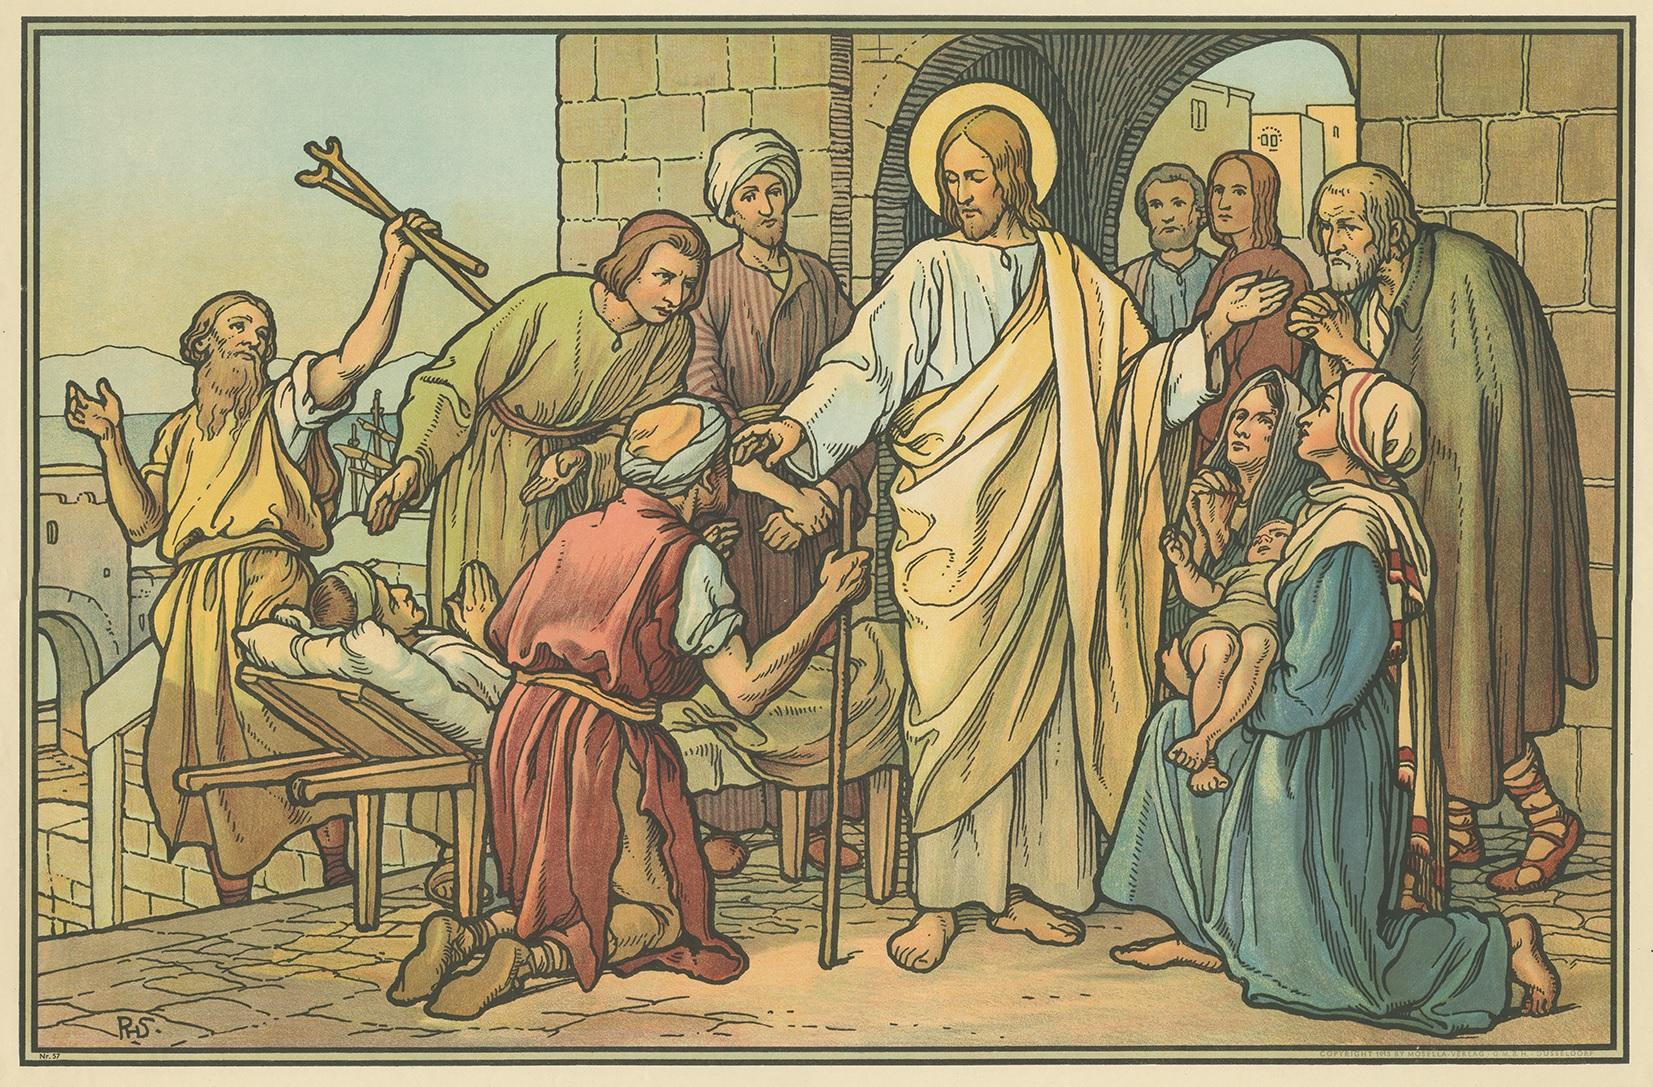 Large antique print of Jesus healing the sick. Published by Mosella-Verlag, 1913. This print originates from a series titled 'Kathol. Schulbibelwerk von Dr. Ecker'.